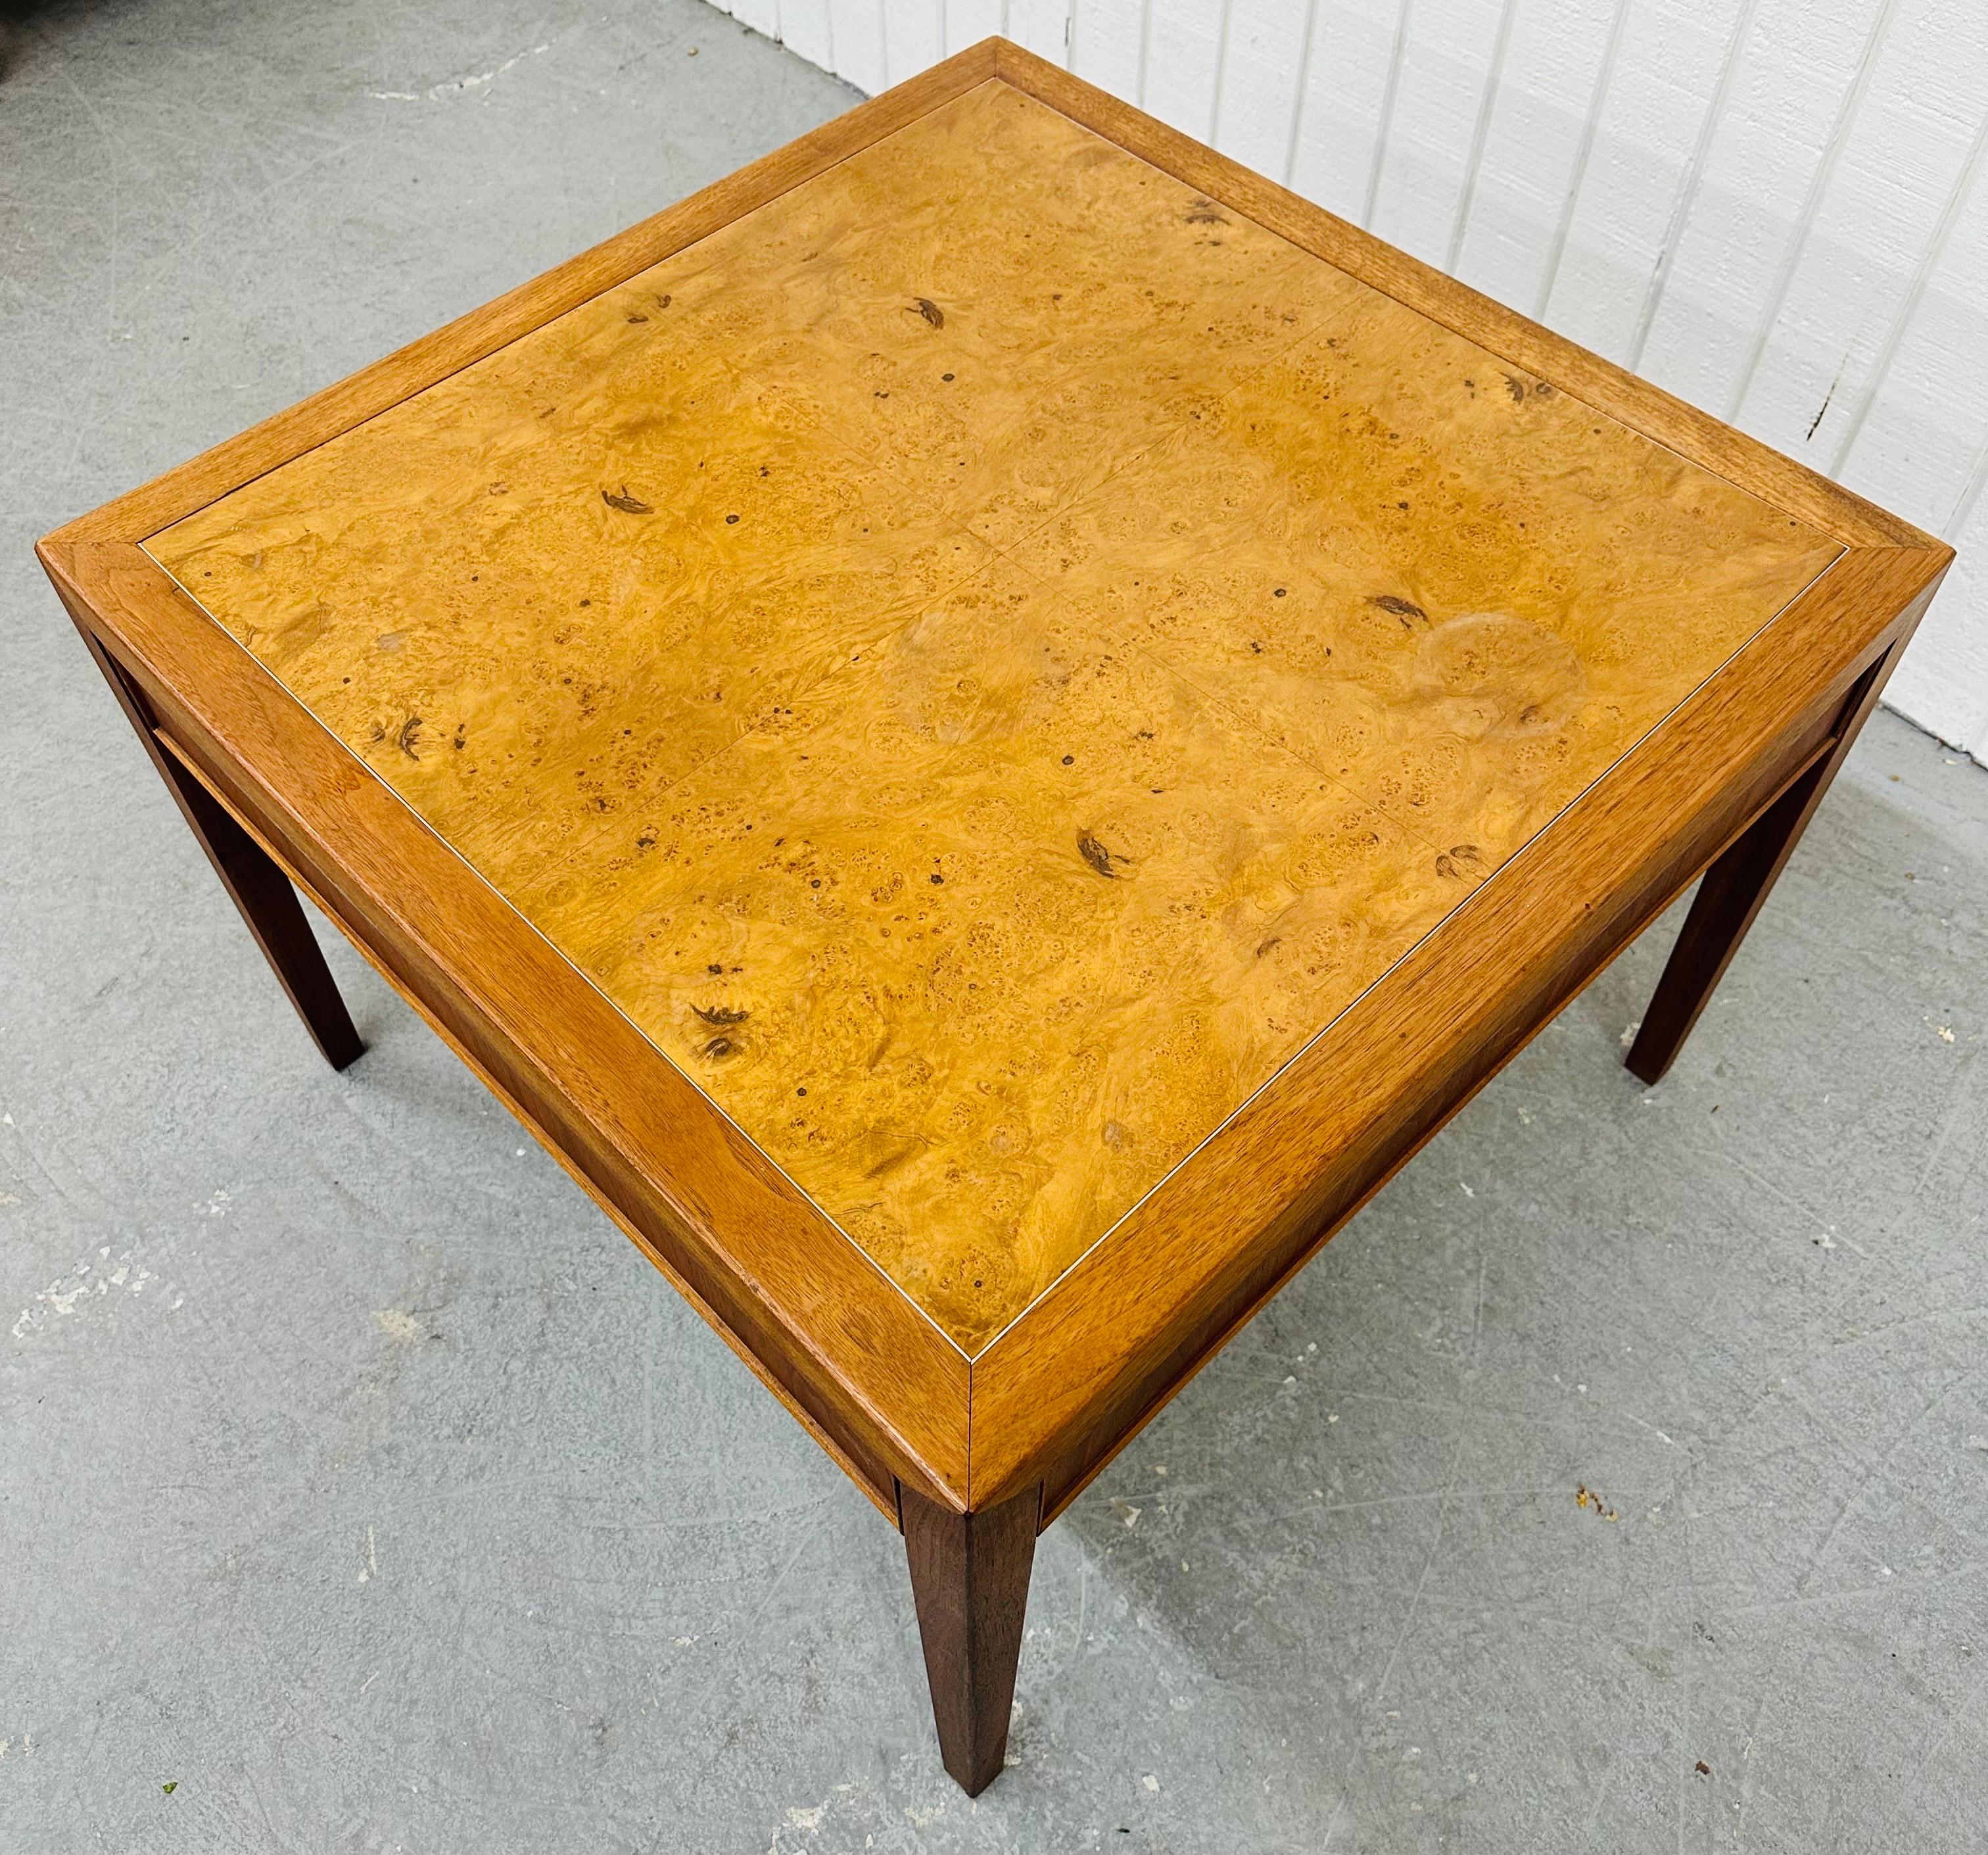 This listing is for a Mid-Century Modern Burled Wood Side Table. Featuring a straight line design, rectangular top, four modern legs, and a combination of burled wood and walnut. This is an exceptional combination of quality and design!